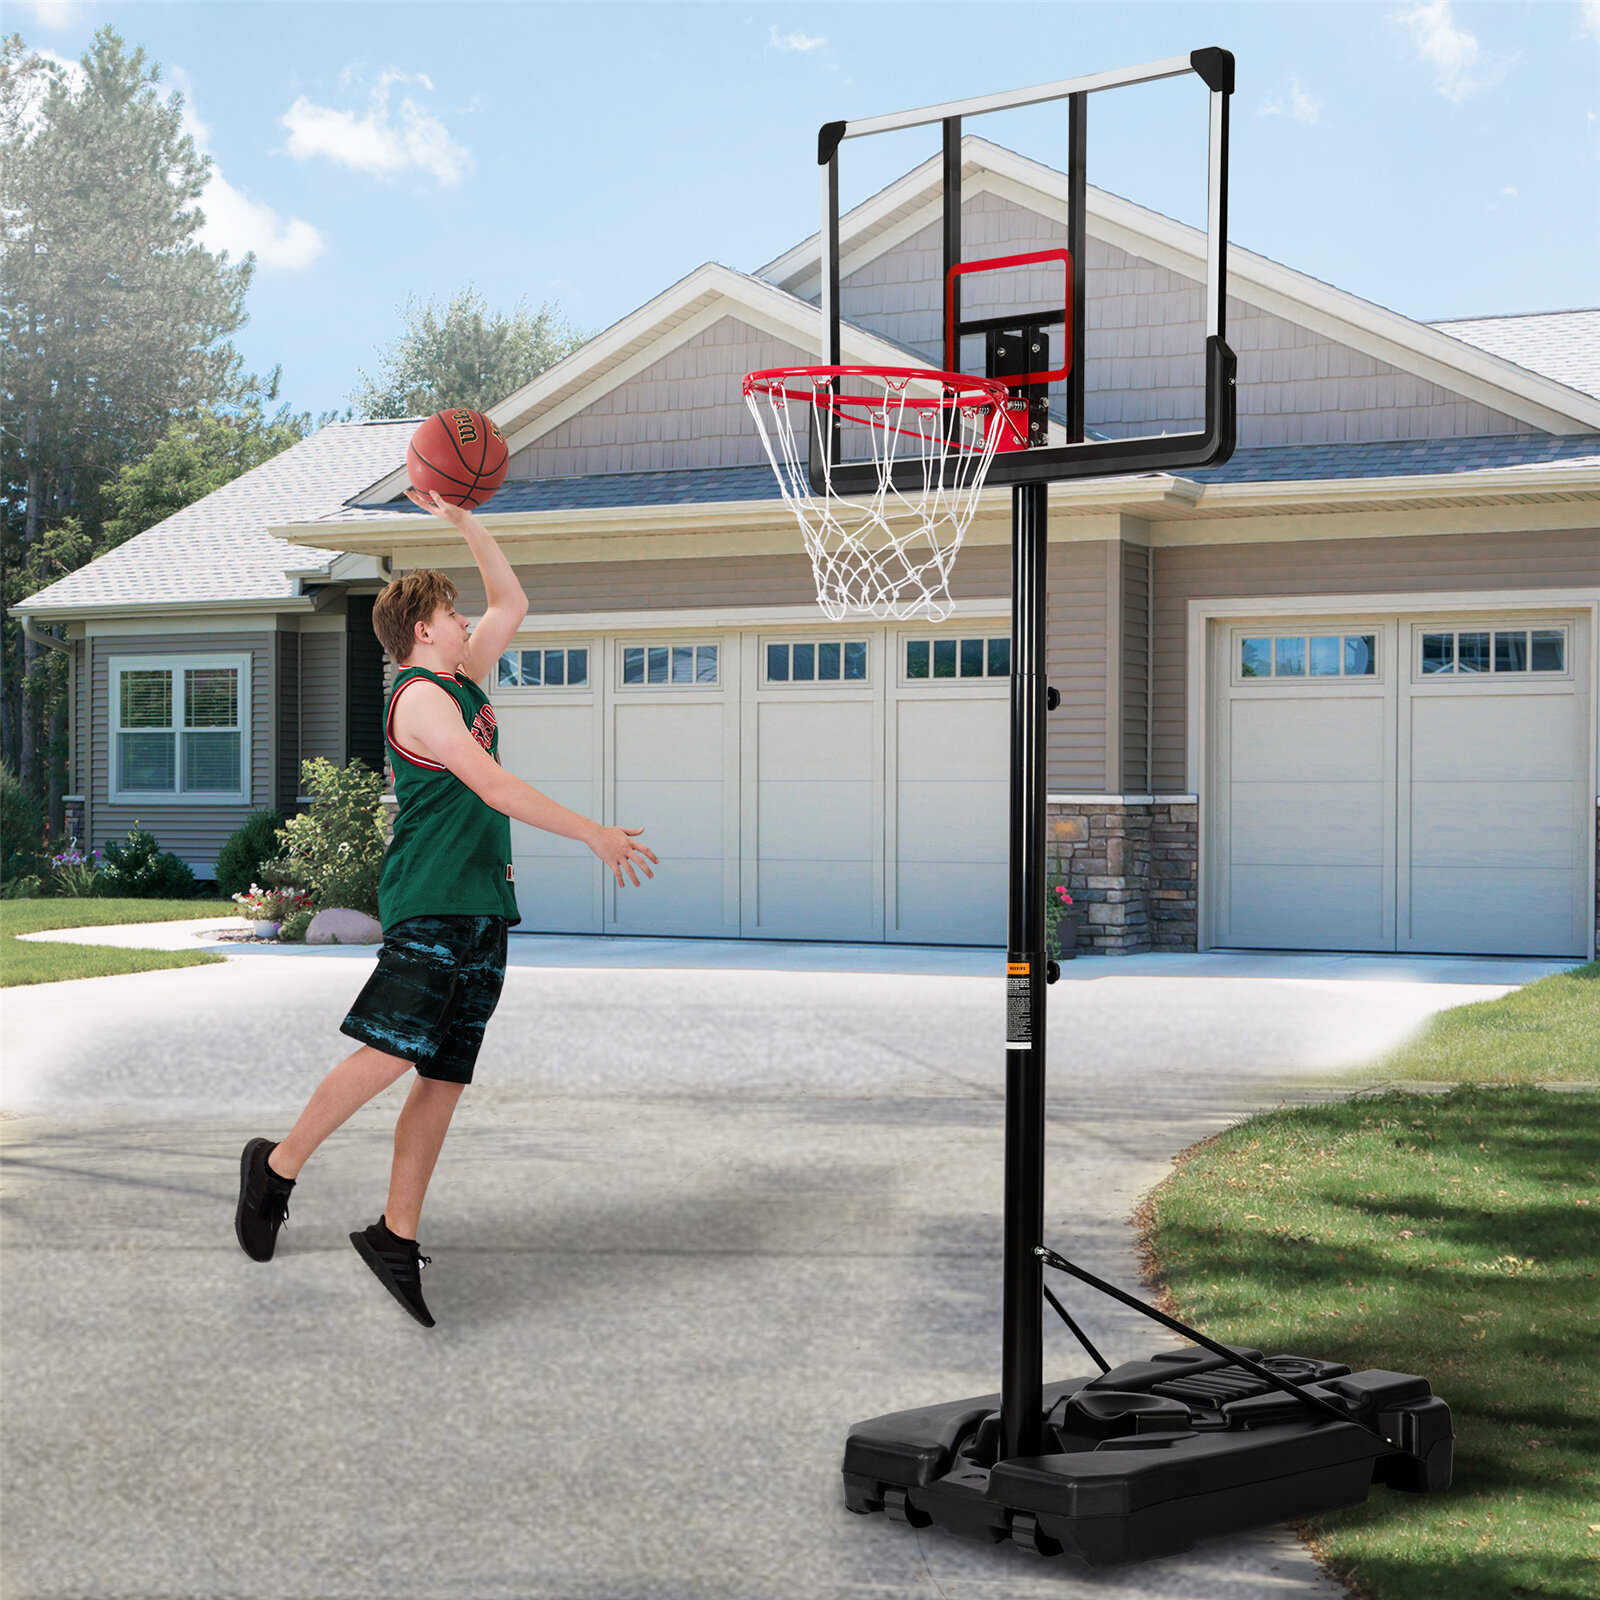 Norbi Basketball Hoop & Goal Outdoor System With 6.6-10Ft Height Adjustment For And Adults | Wayfair